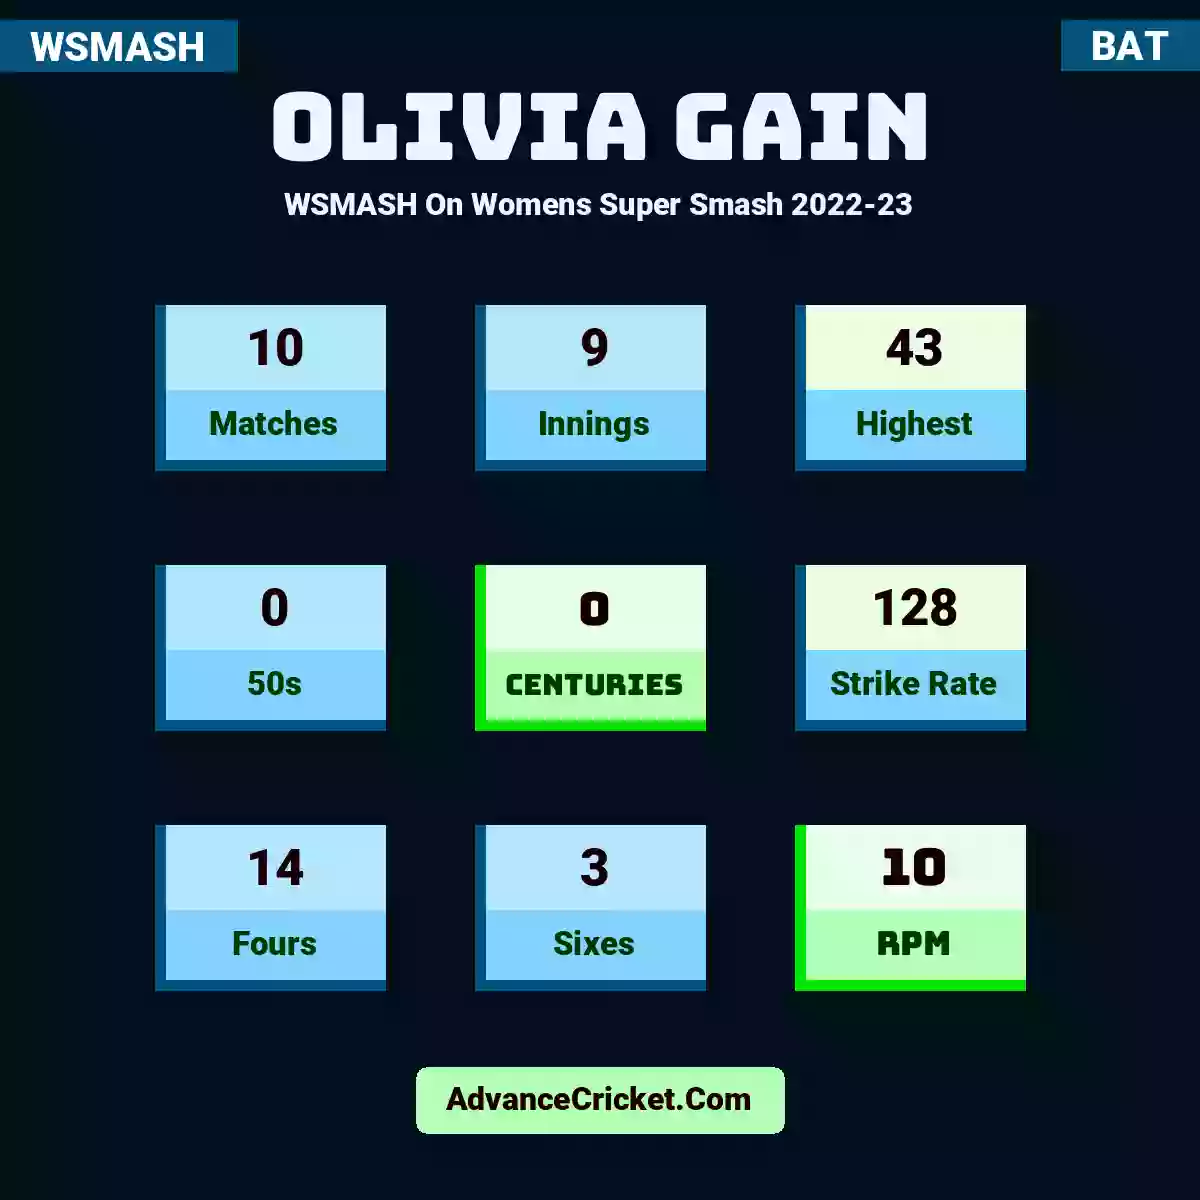 Olivia Gain WSMASH  On Womens Super Smash 2022-23, Olivia Gain played 10 matches, scored 43 runs as highest, 0 half-centuries, and 0 centuries, with a strike rate of 128. O.Gain hit 14 fours and 3 sixes, with an RPM of 10.